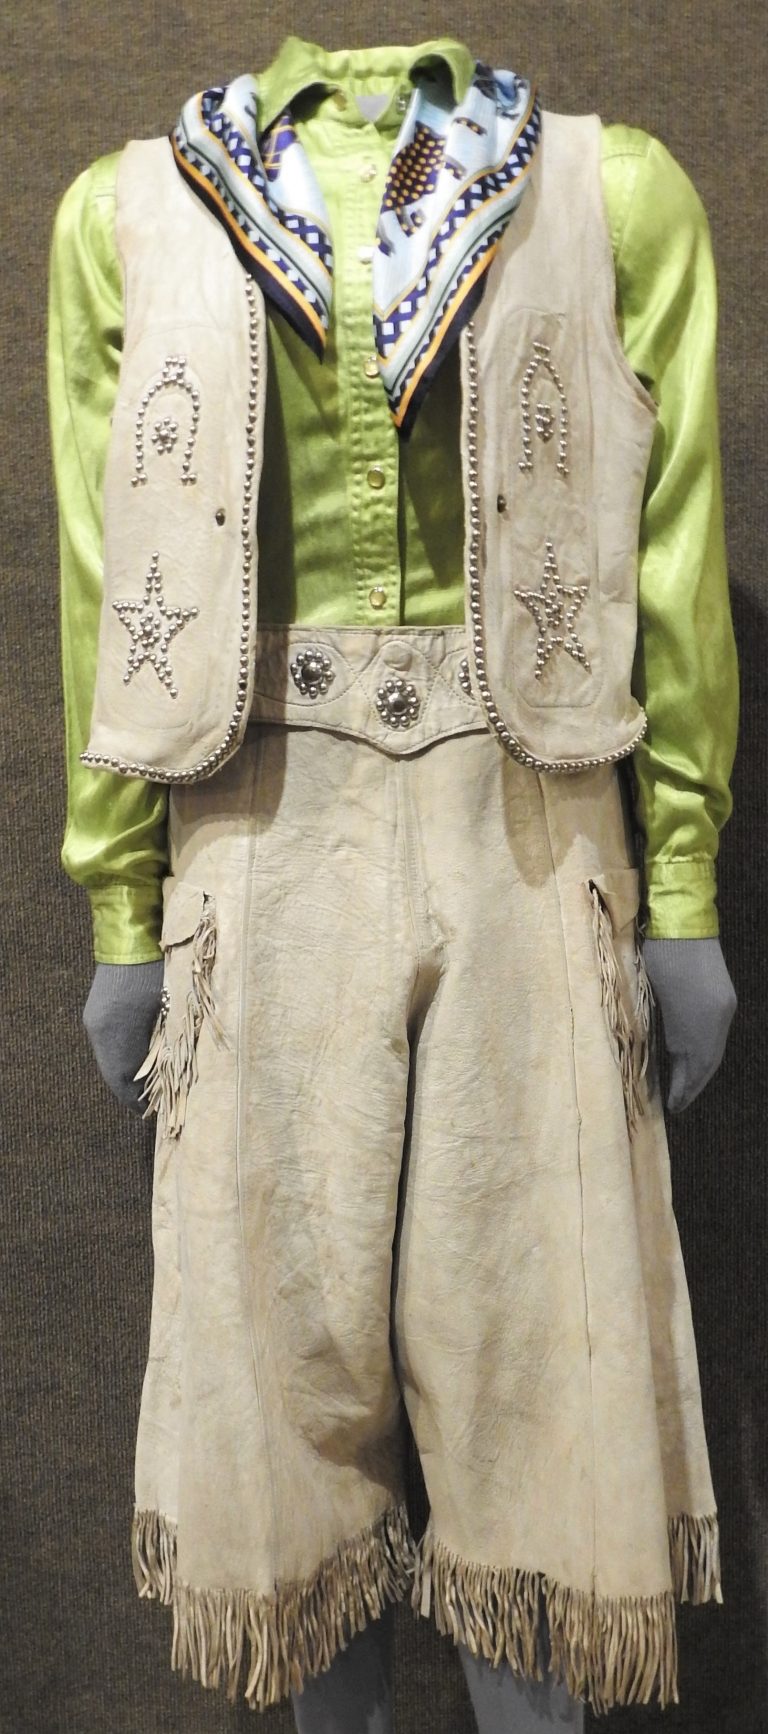 Buckskin Suit Worn by Rodeo Queen Dawn Norris, 1922. Generously Donated by the Family of Dawn Norris, 70-139.